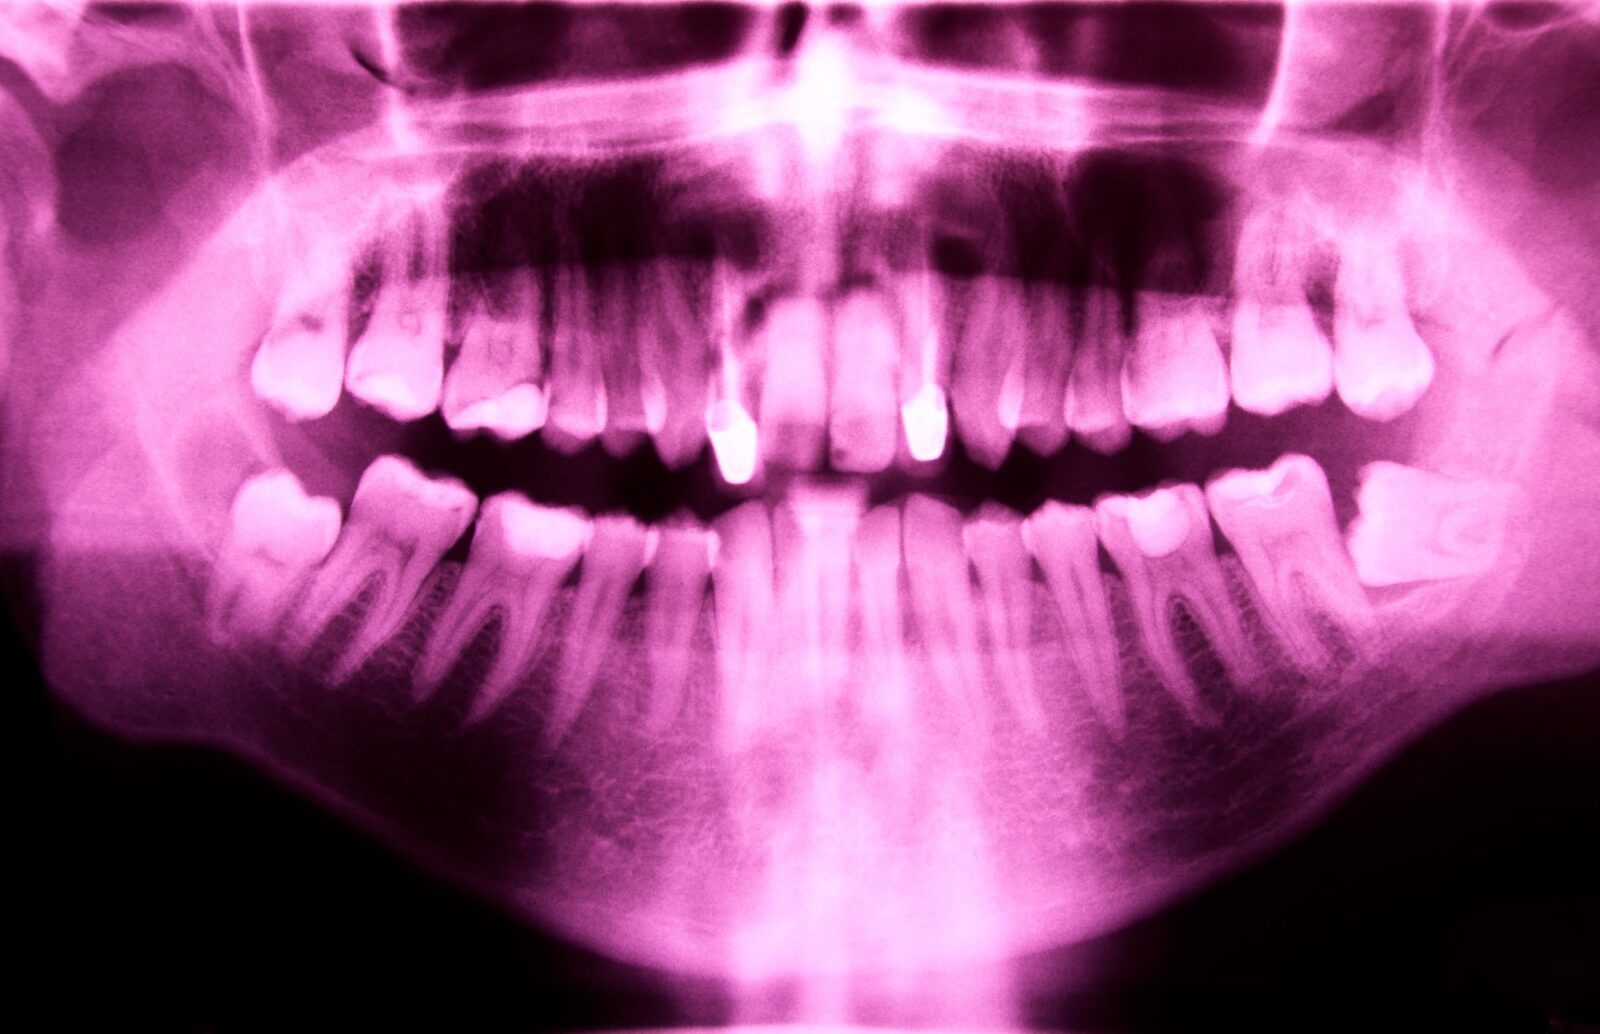 Dental X-ray showing multiple teeth including root resorption